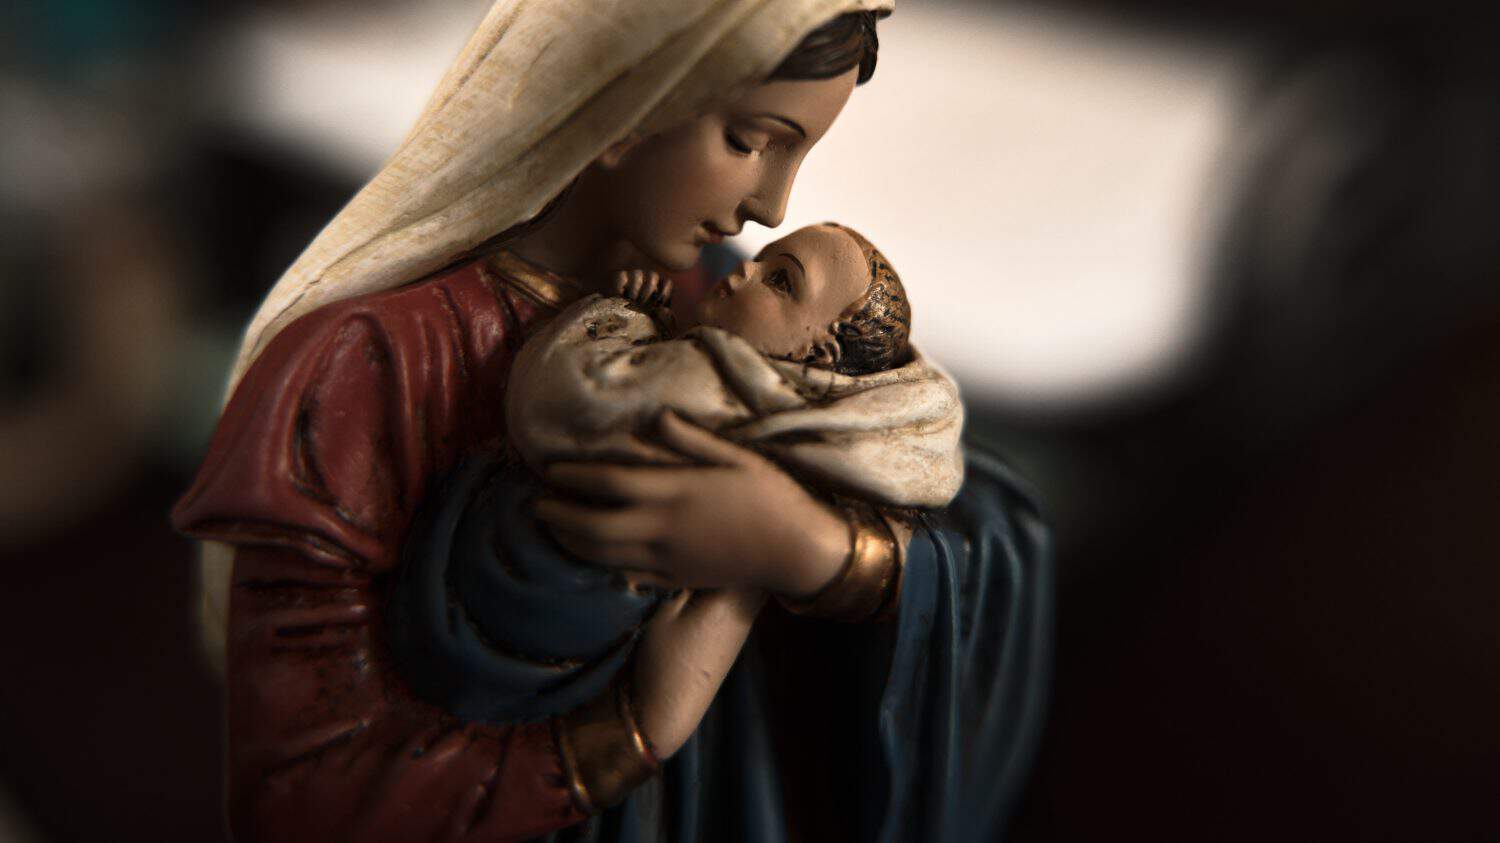 Statue of Mary holding the baby Jesus